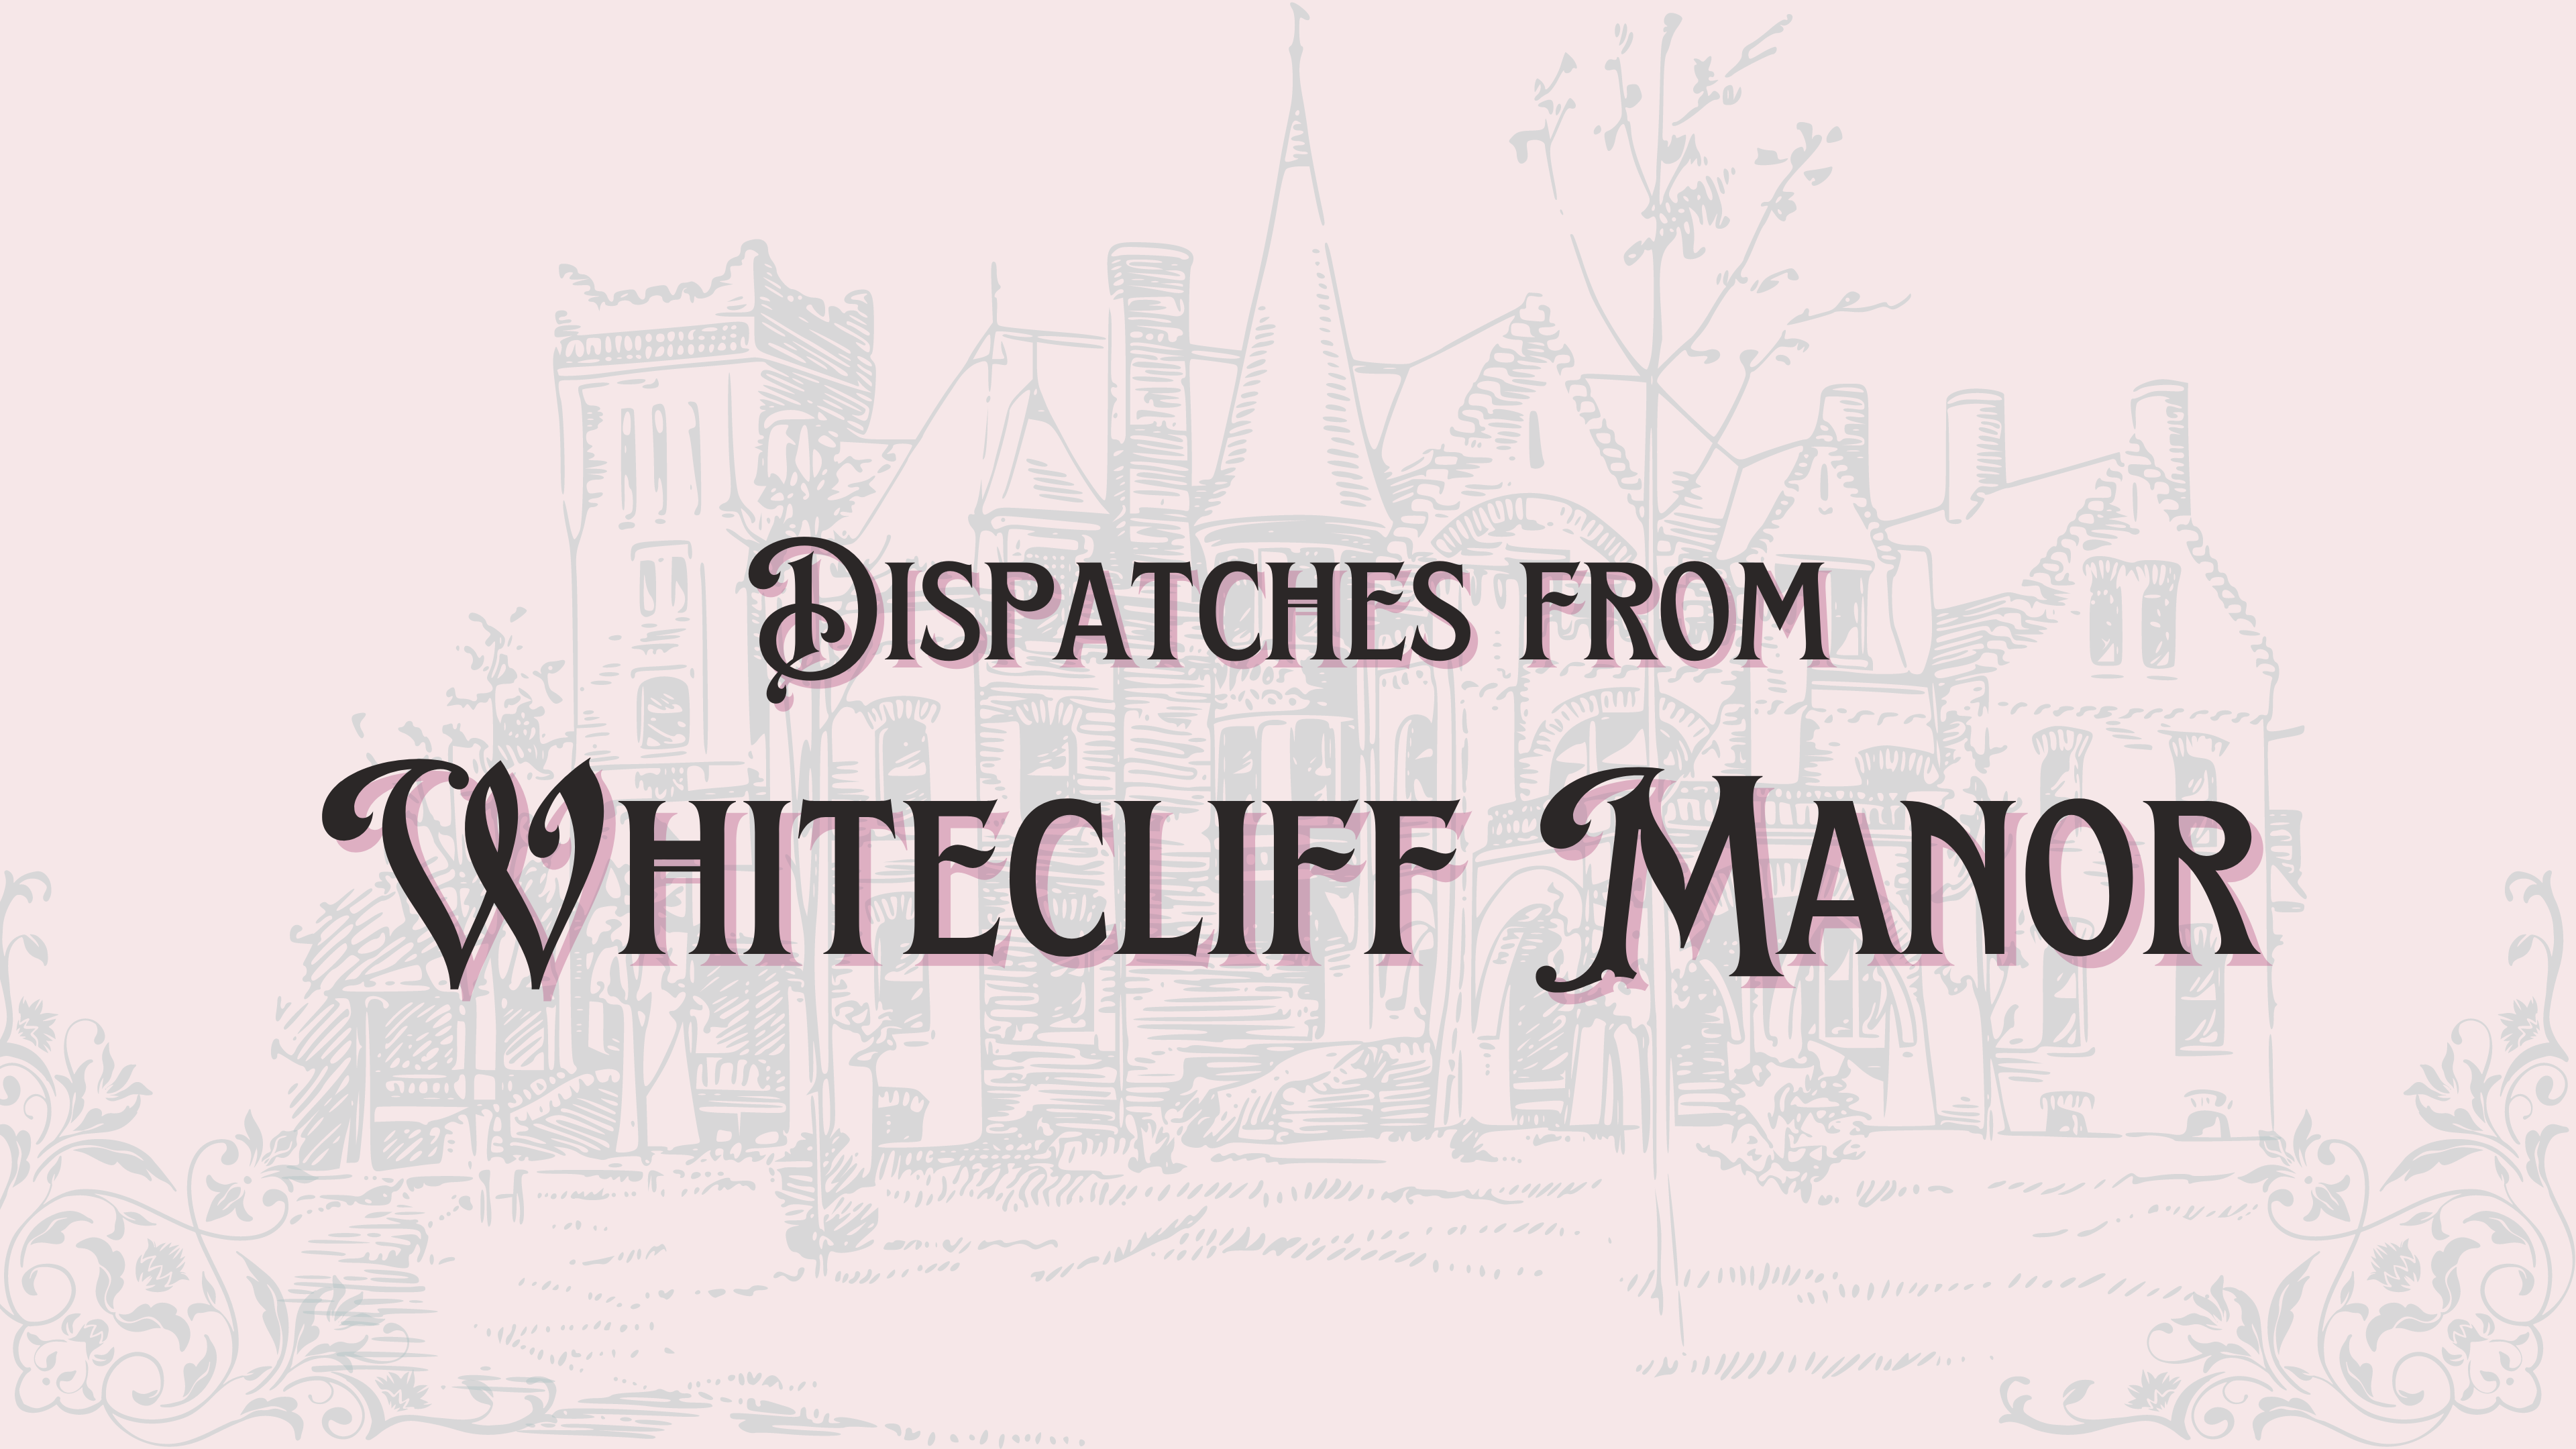 Dispatches from Whitecliff Manor